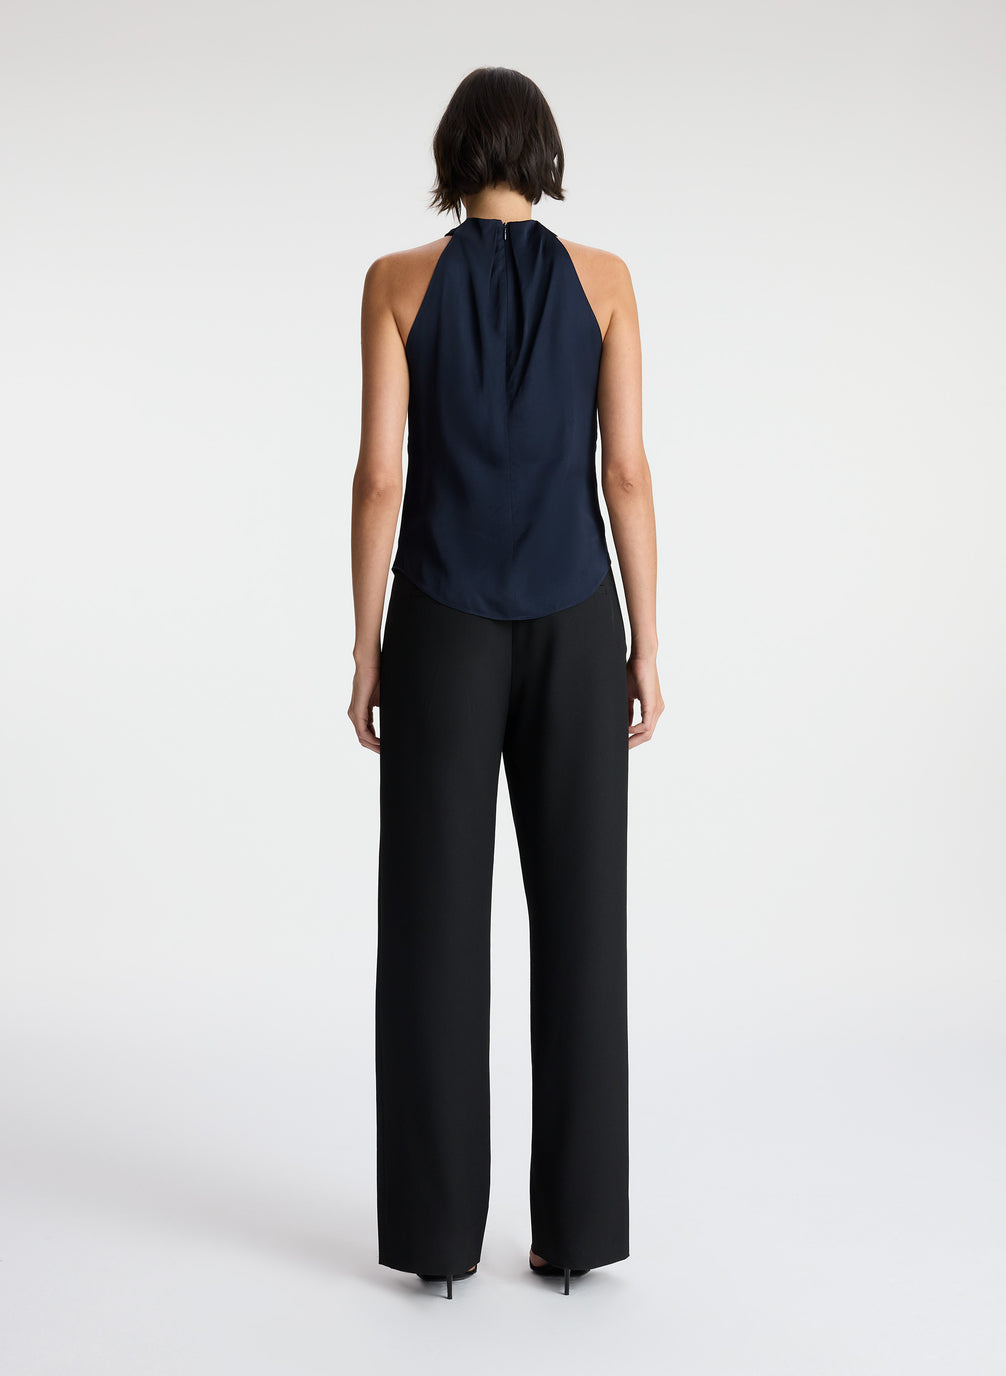 back view of woman wearing navy blue satin halter top with black pants